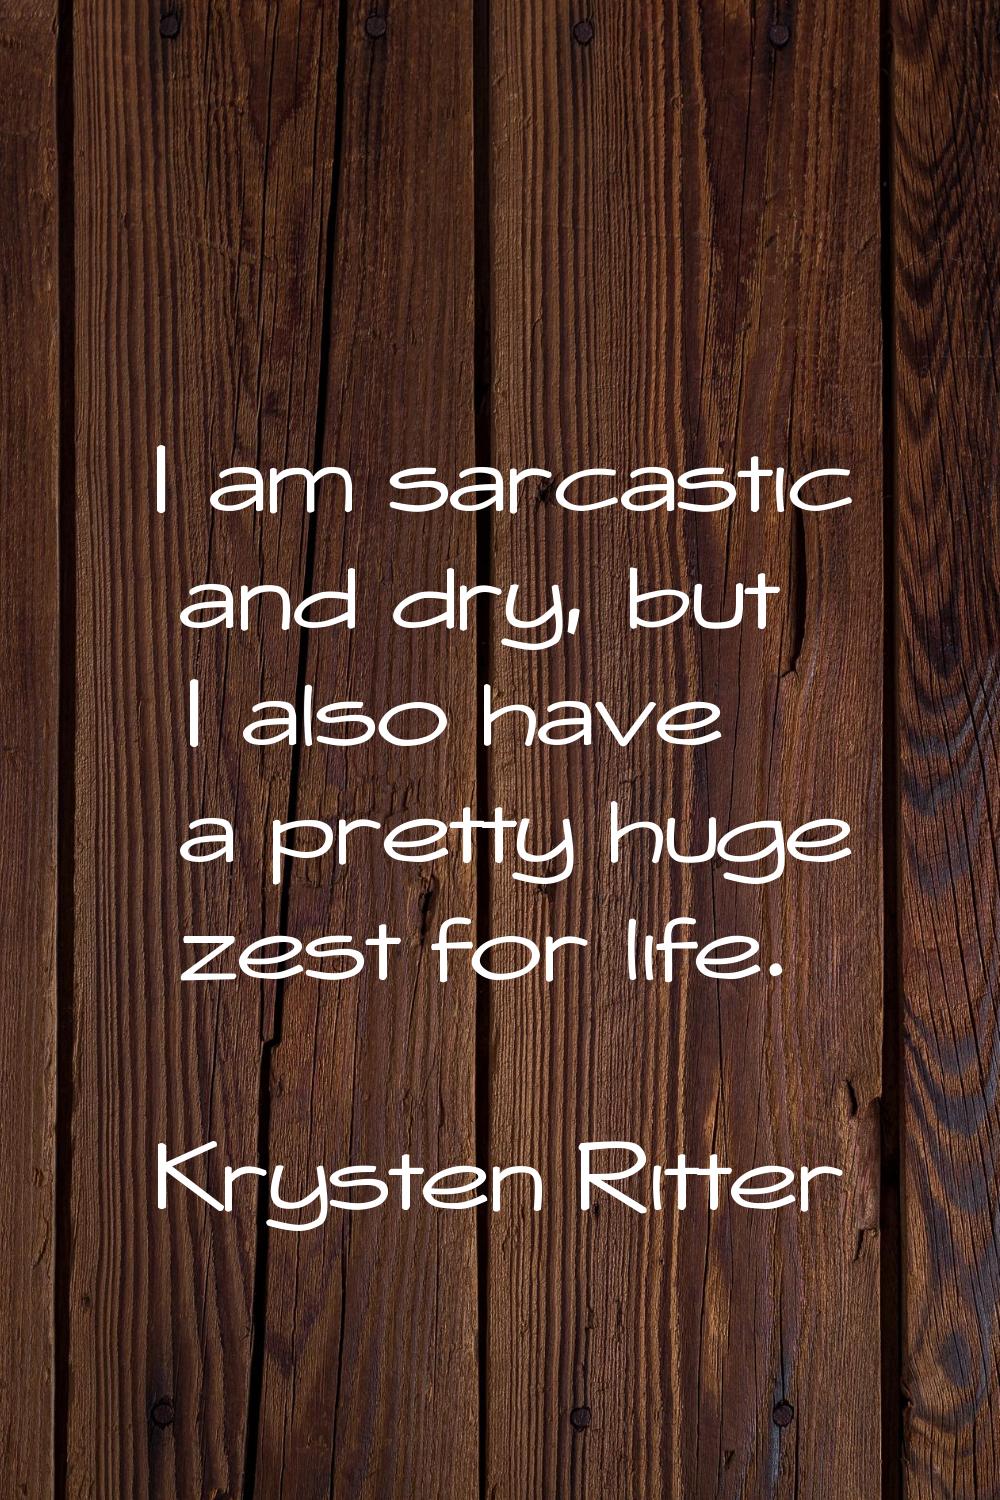 I am sarcastic and dry, but I also have a pretty huge zest for life.